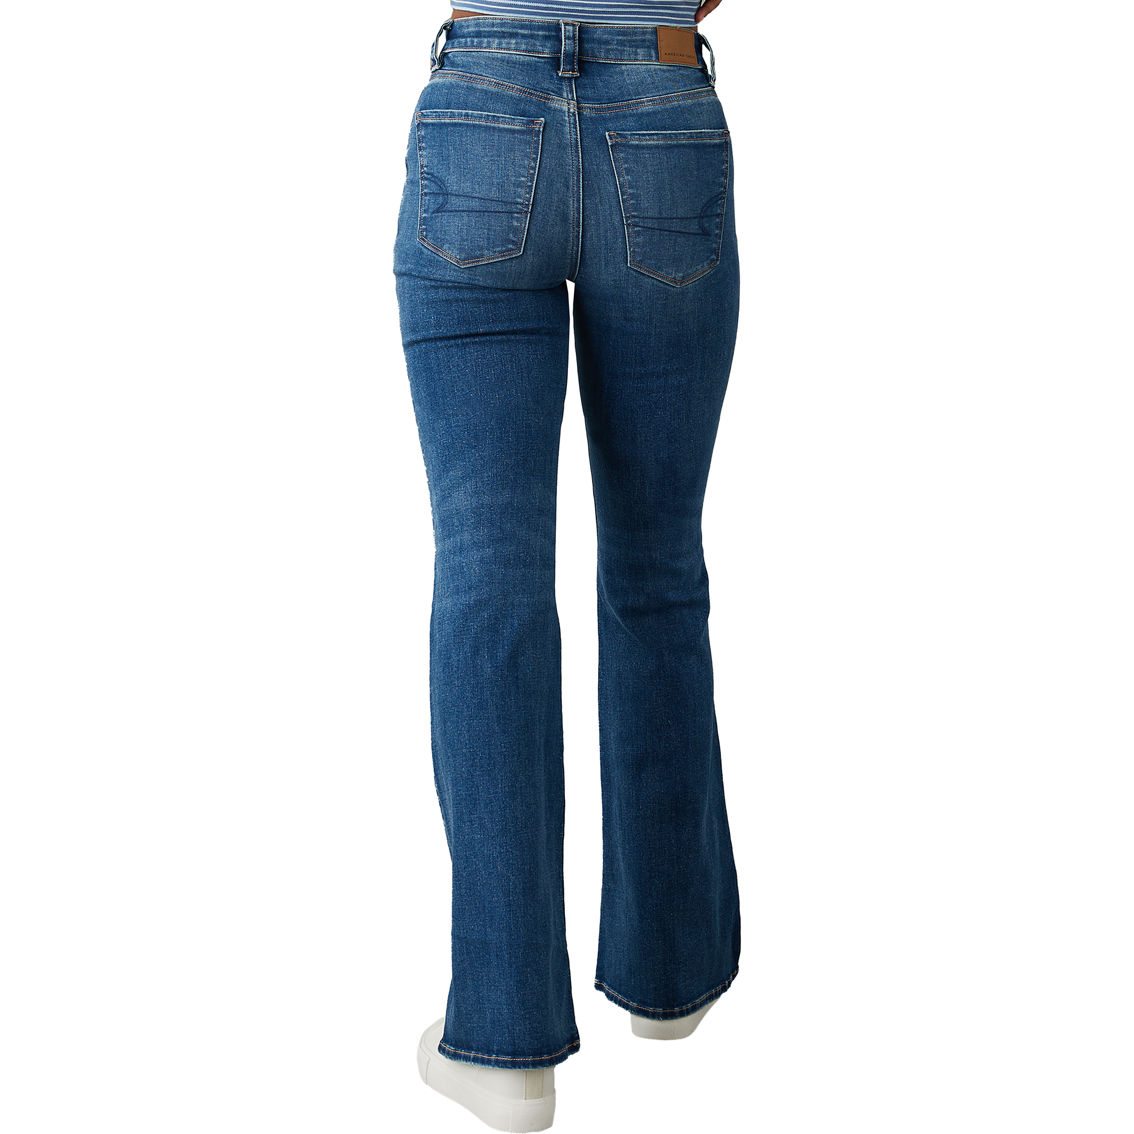 American Eagle Juniors Next Level Super High Waisted Flare Jeans - Image 2 of 5